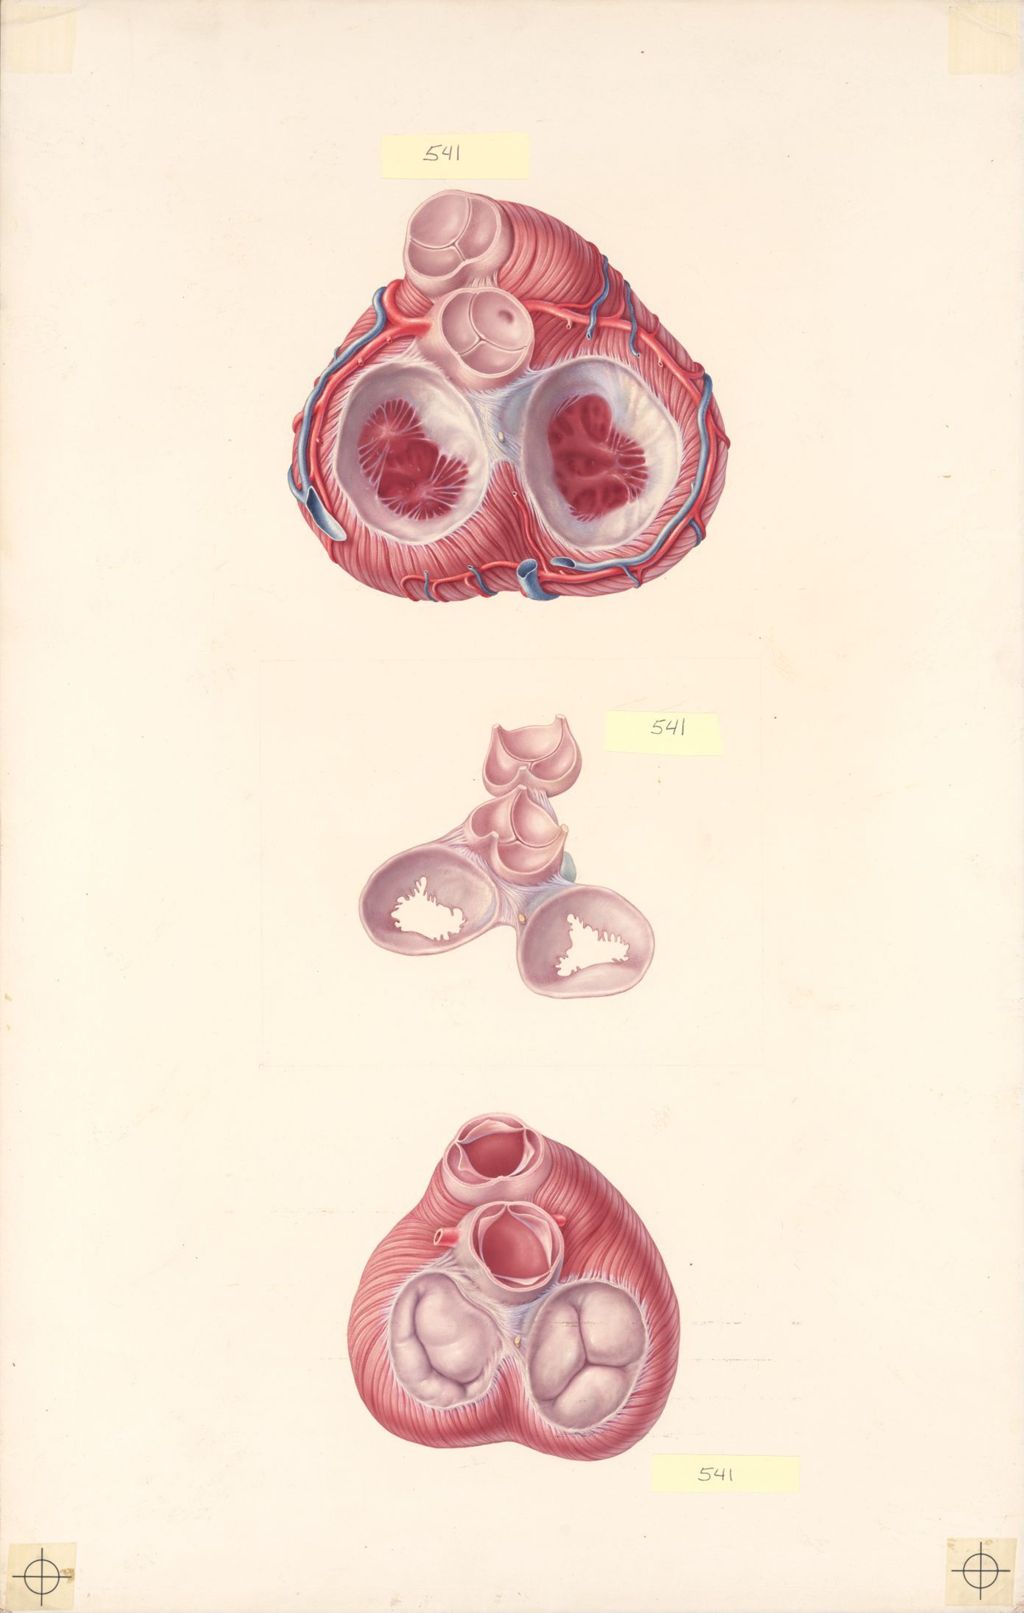 Explanatory Atlas of Anatomy, Anatomy of the Valves of the Heart, Plate II, The Heart Skeleton and its Relationship to the Valves